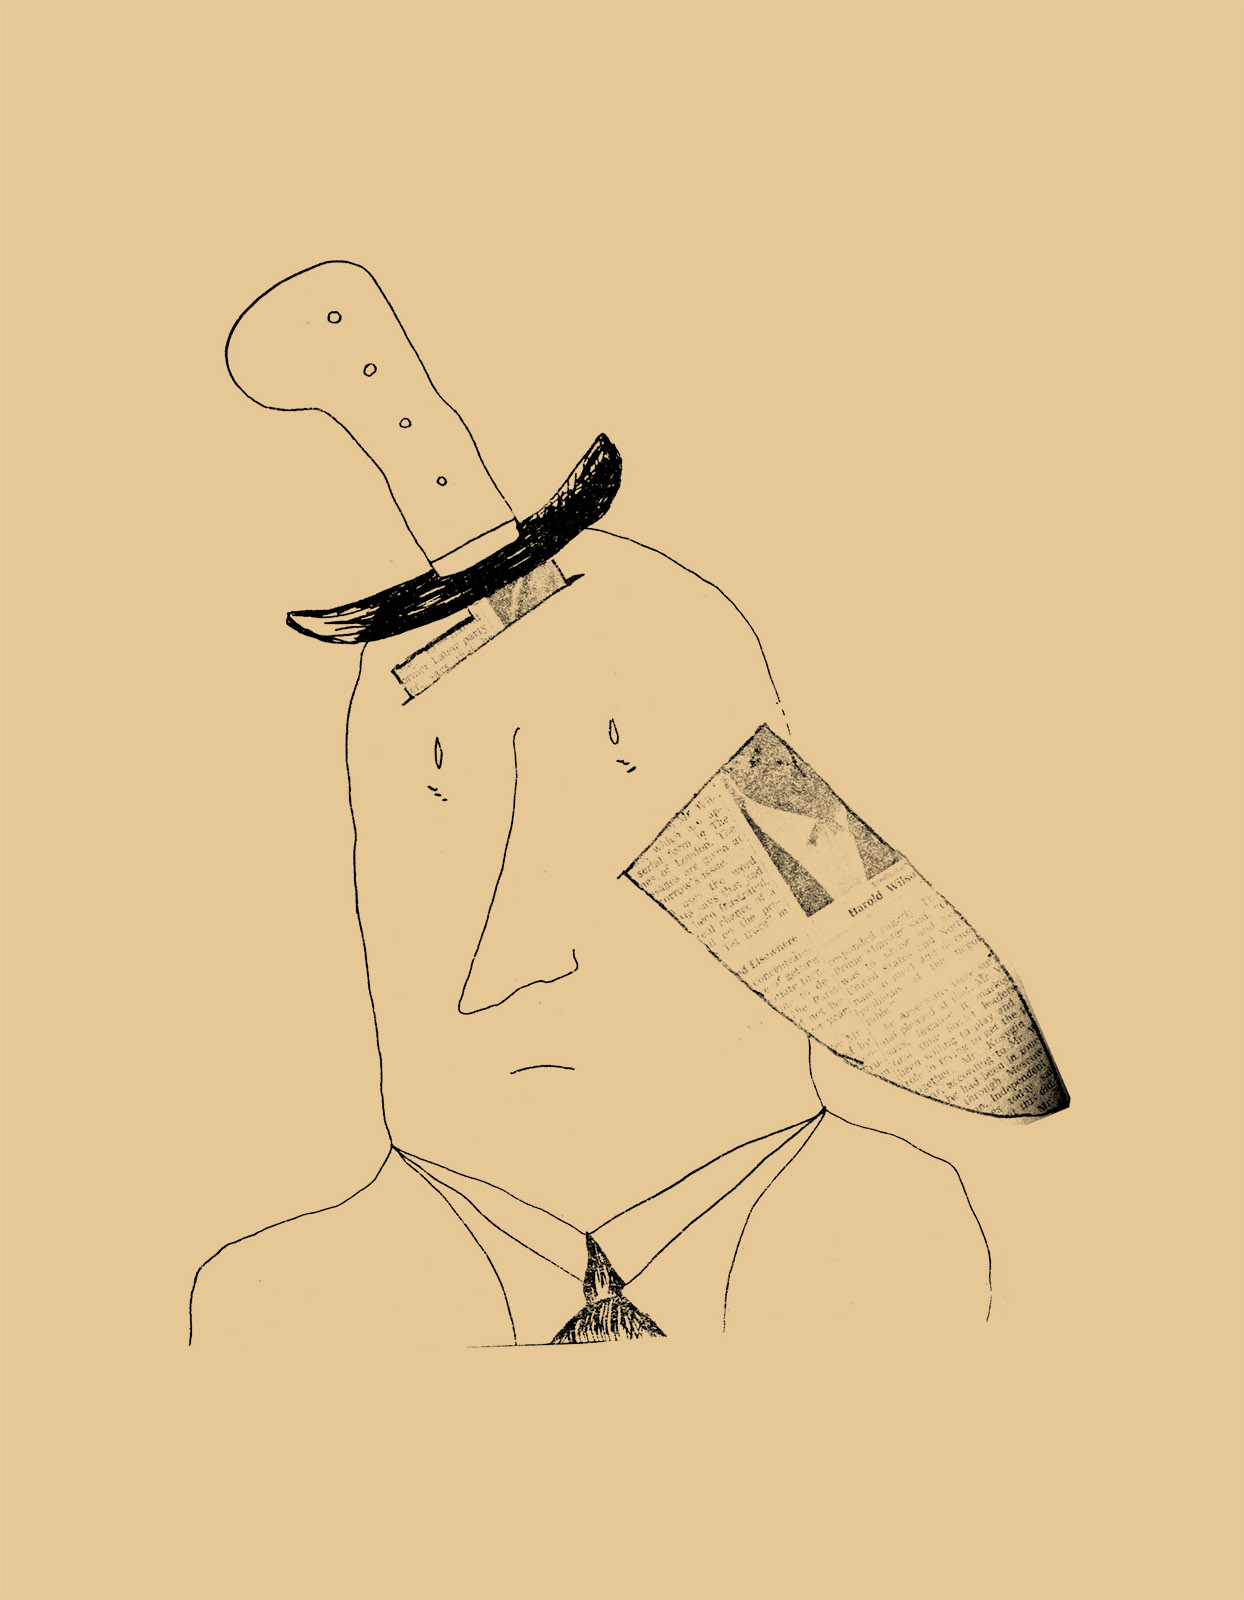 A line drawing of a human head. The human wears a tie, and has a large knife stuck in his head. The blade of the knife is made of the New York Times.